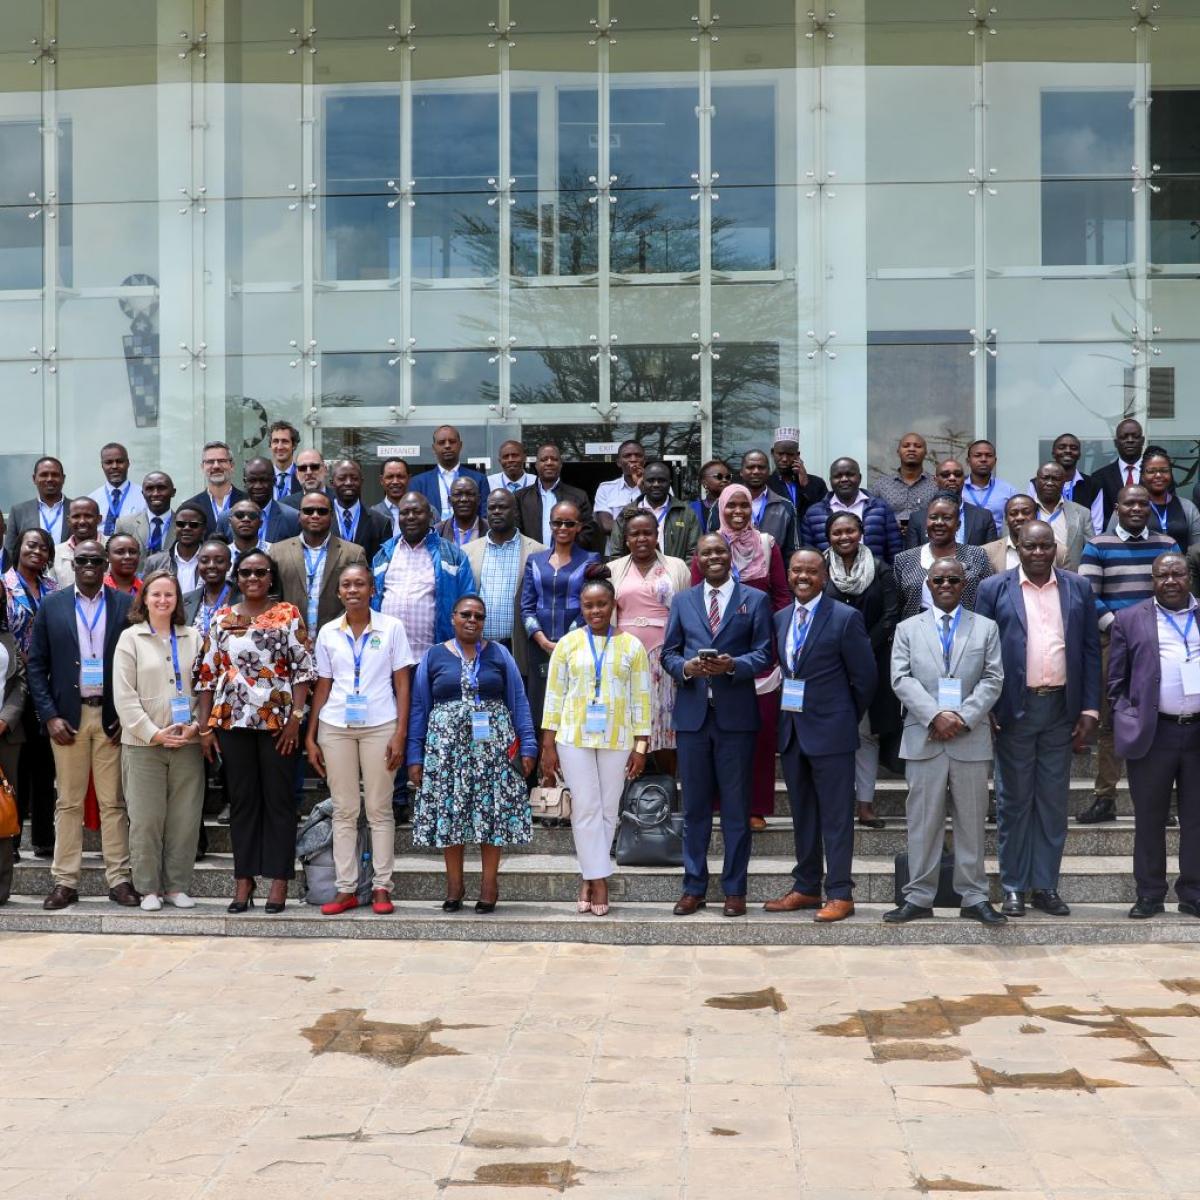 Participants included representatives from water and sanitation utilities, government, finance institutions, private sector solar providers and development partners